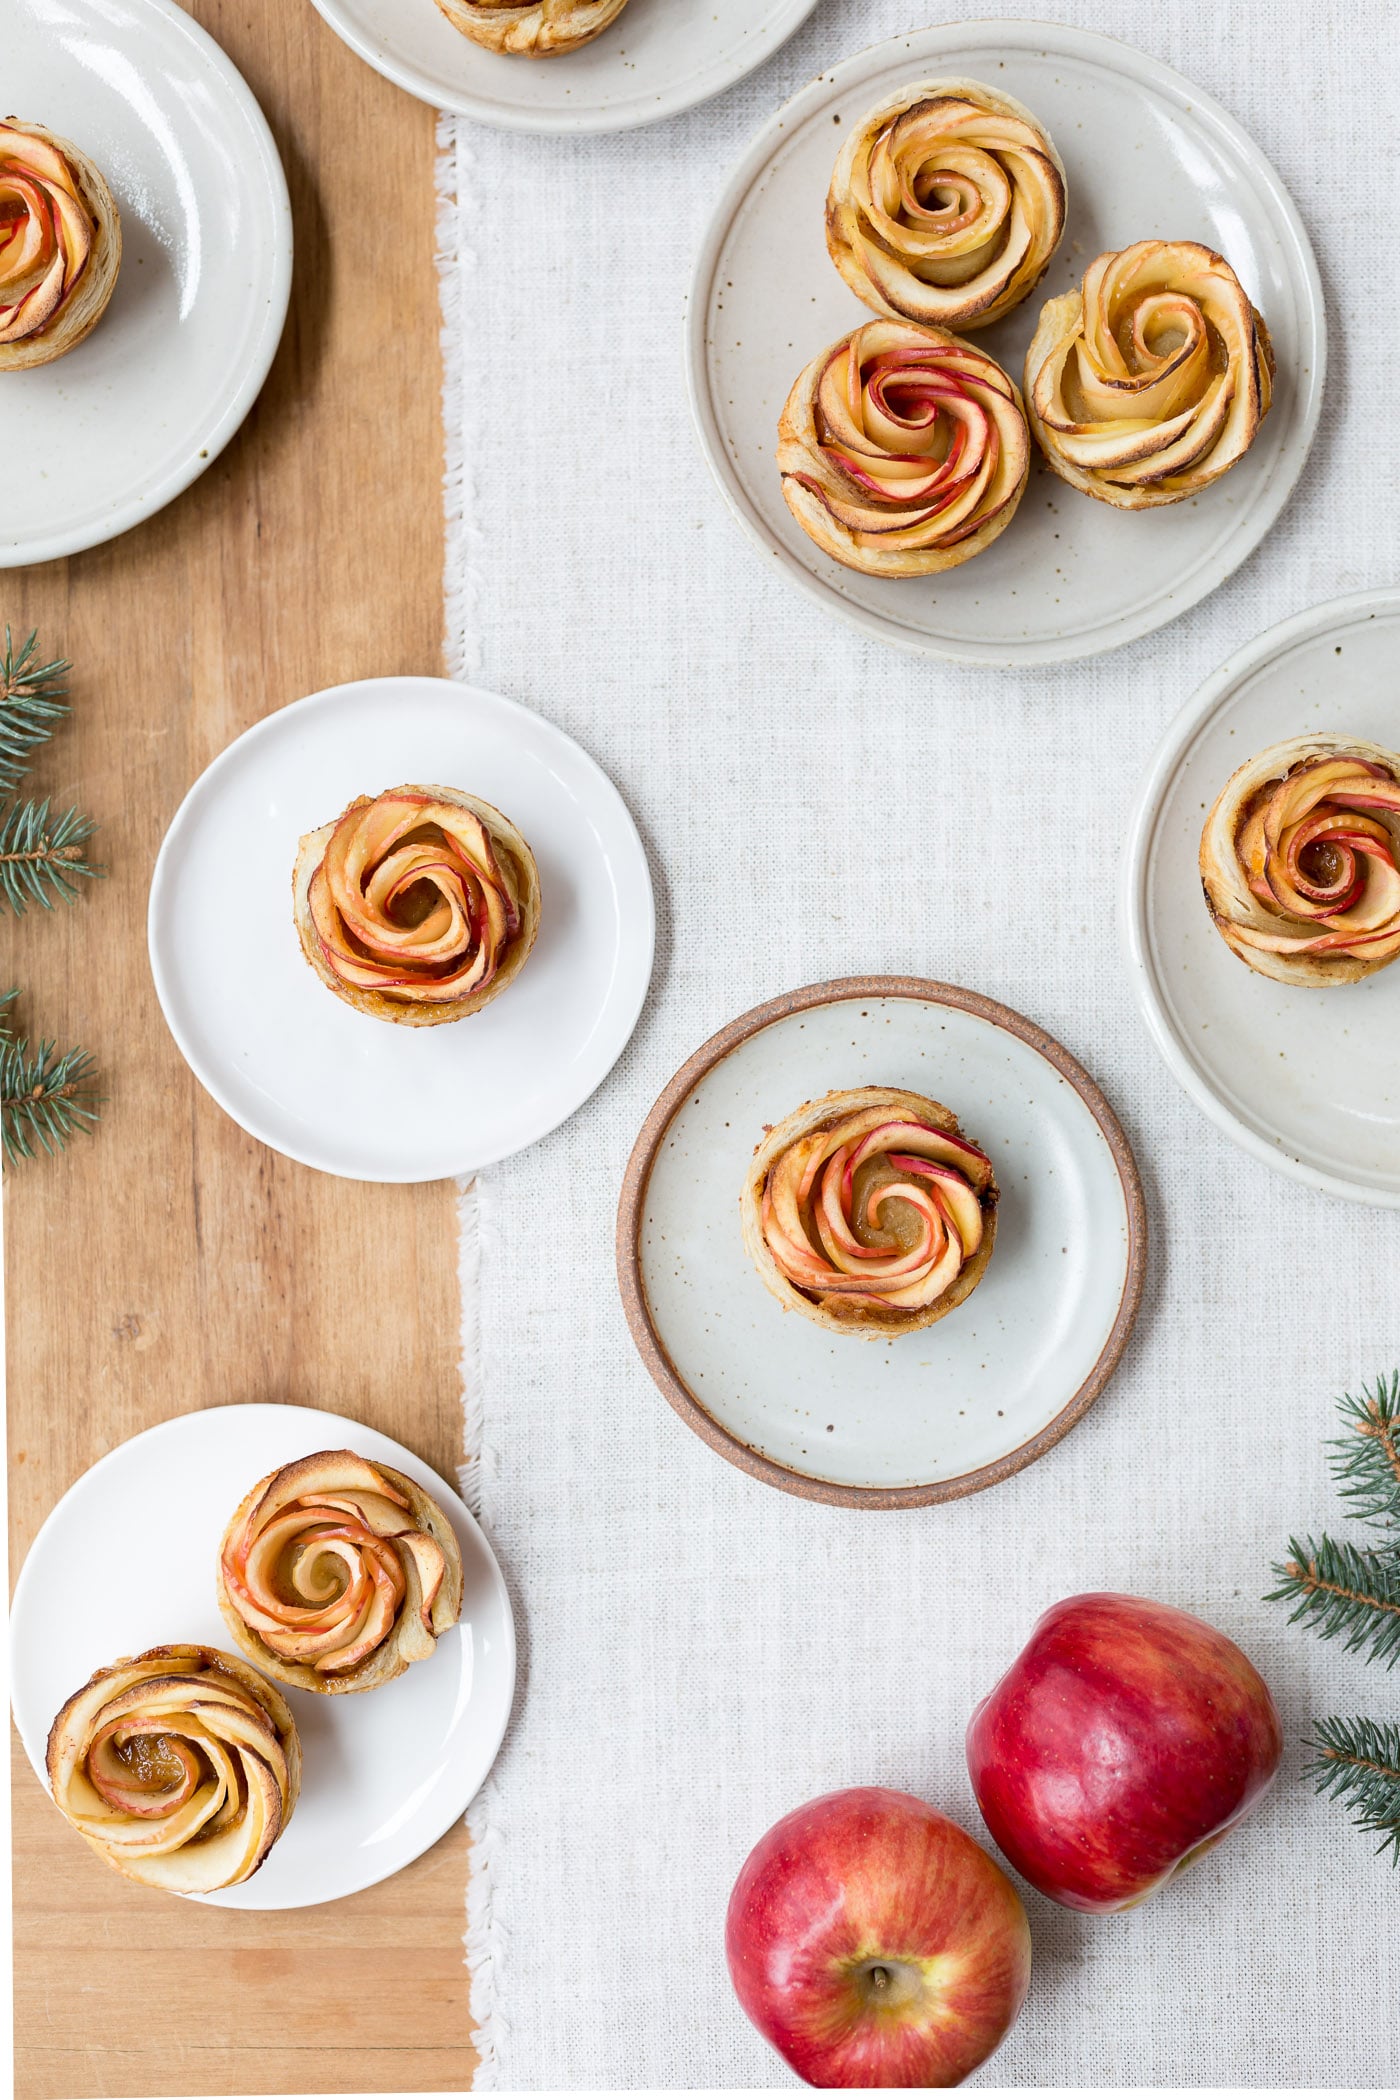 How to make puff pastry apple roses - Showcasing freshly baked apple roses served on small plates.